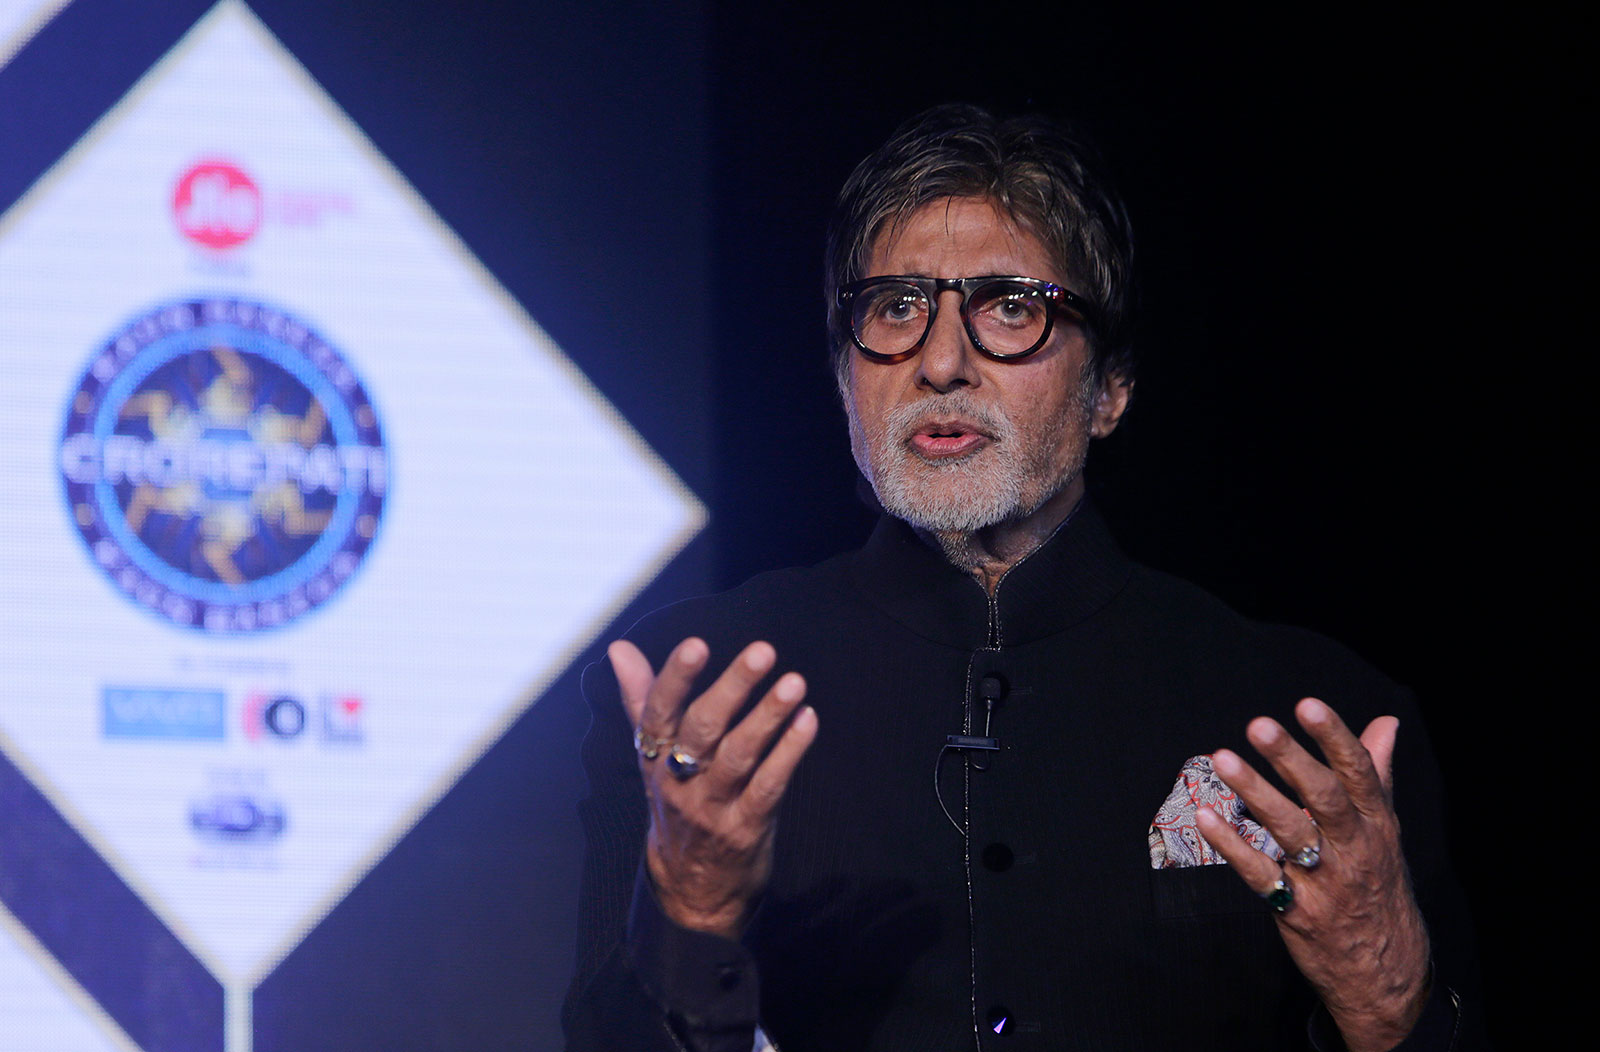 Bollywood actor Amitabh Bachchan speaks during a promotional event for his television show 